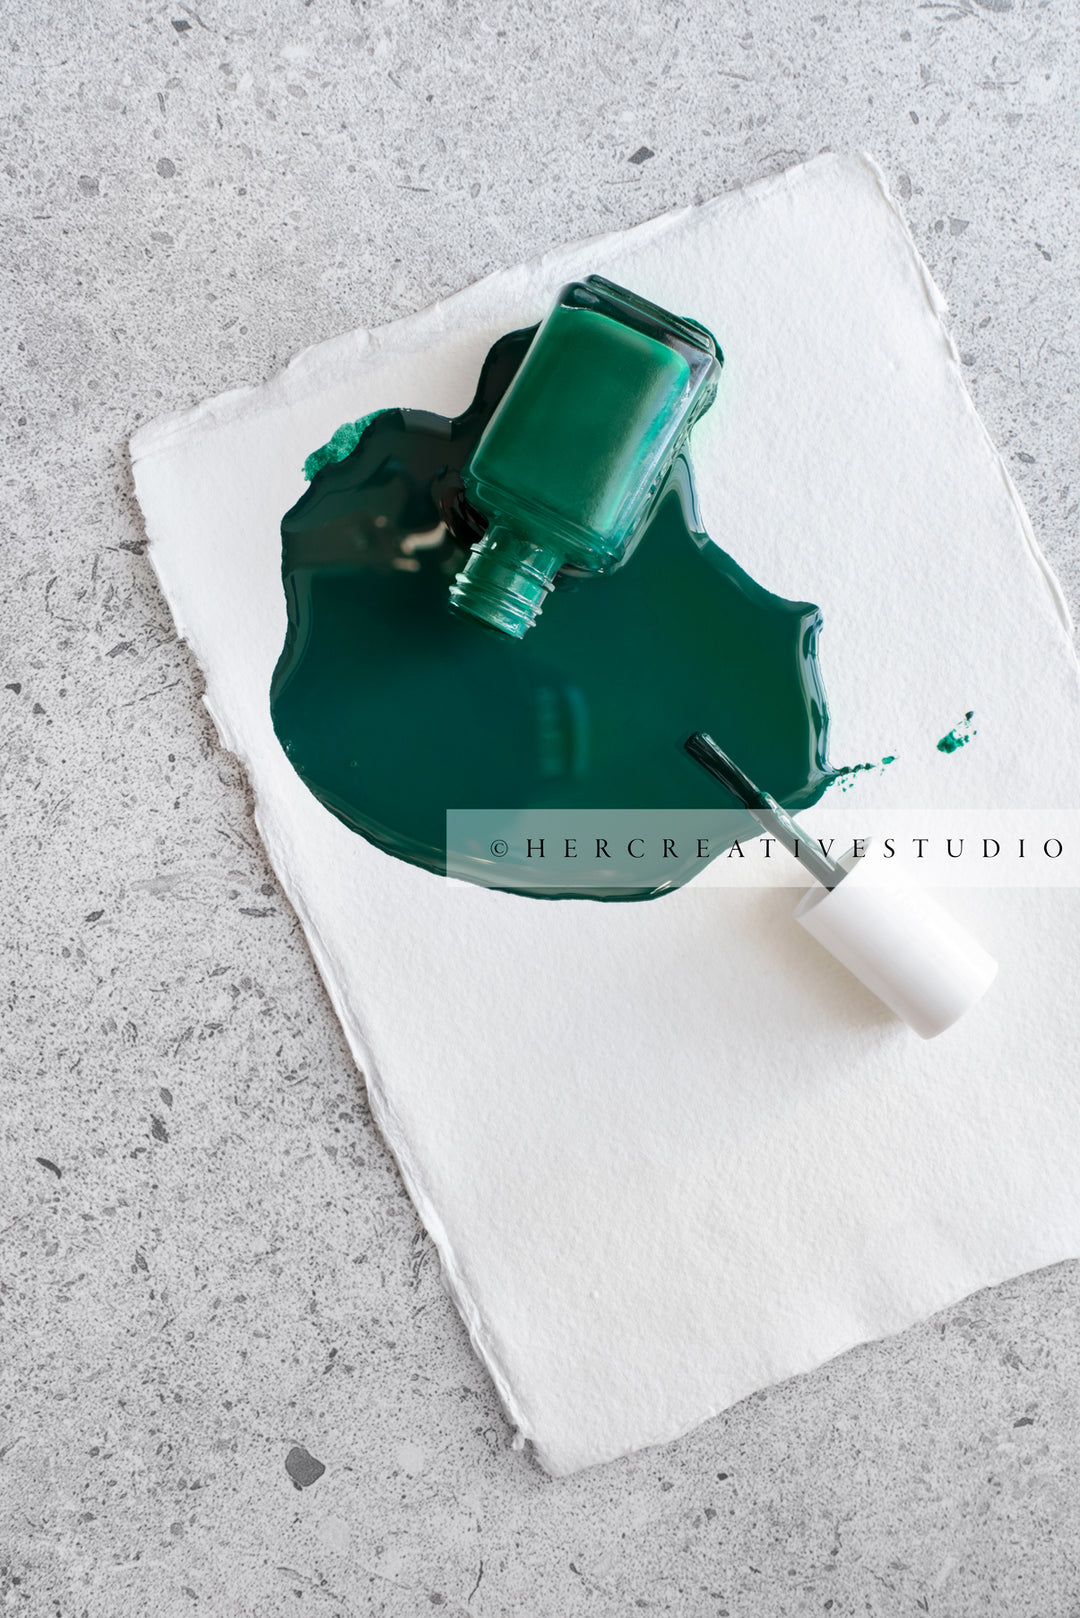 Green Nailpolish Spilled on Table. Styled Stock Image